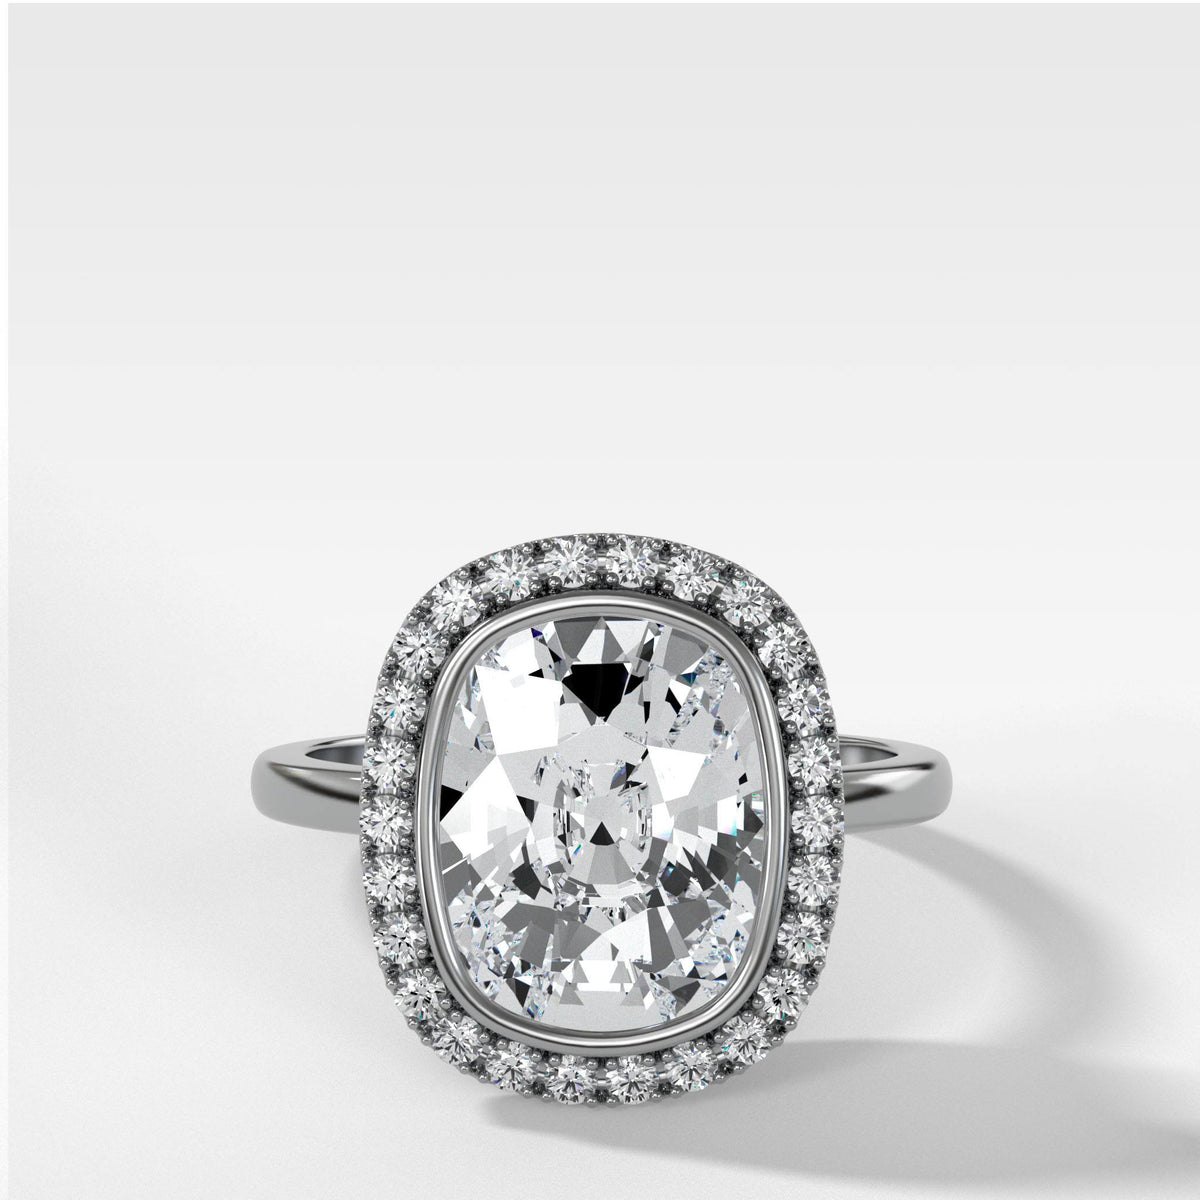 Bezel Set Halo Engagement Ring With Elongated Cushion Cut by Good Stone in White Gold